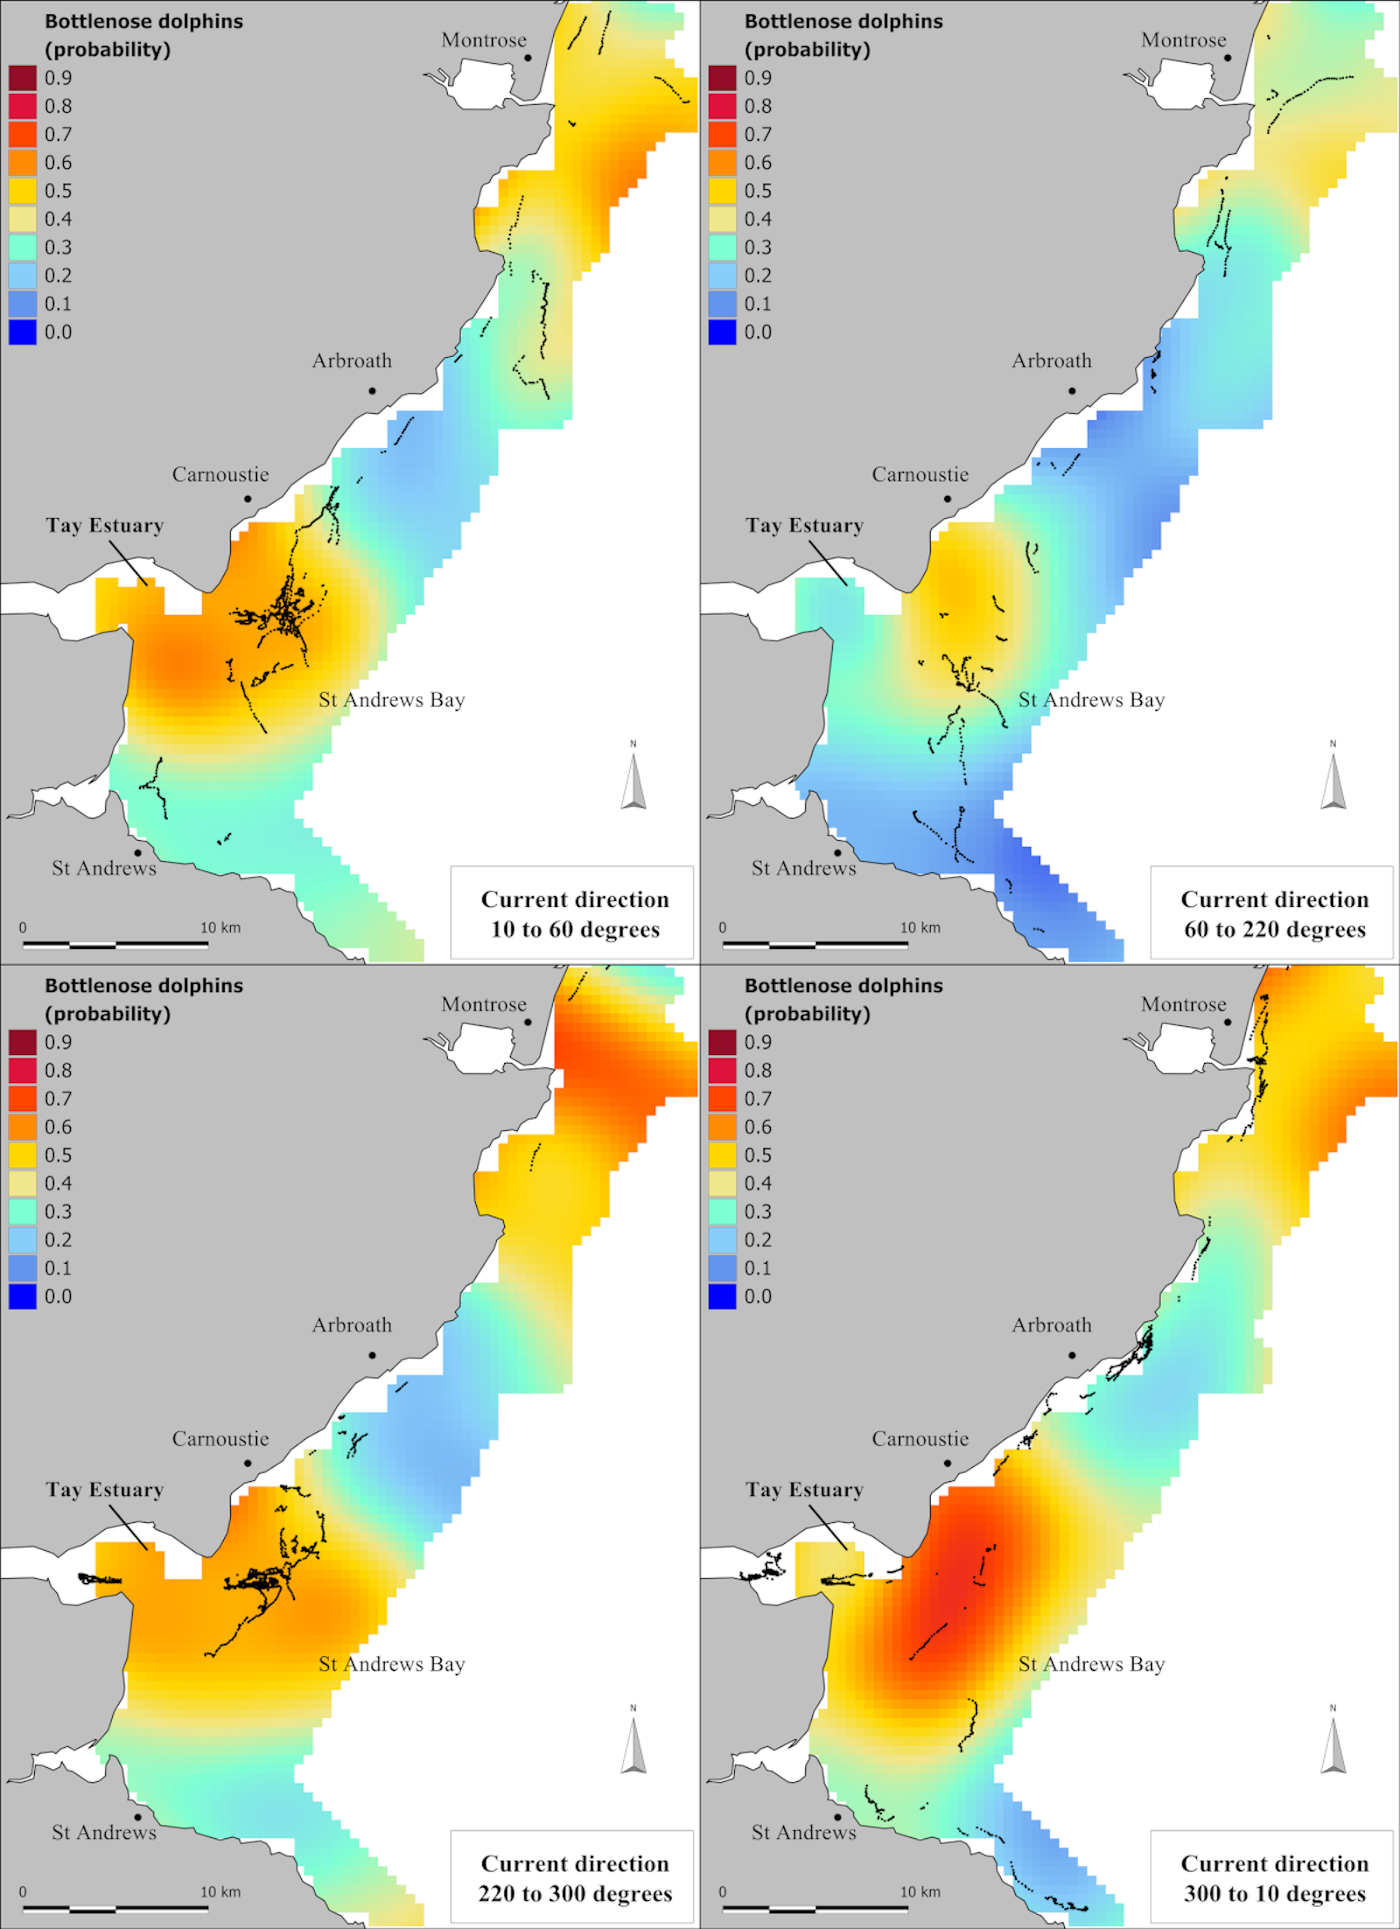 Figure cc: Predicted probability of presence of bottlenose dolphins in St Andrews Bay and Tay Estuary combined area for different current directions, with associated bottlenose dolphin presence points recorded)